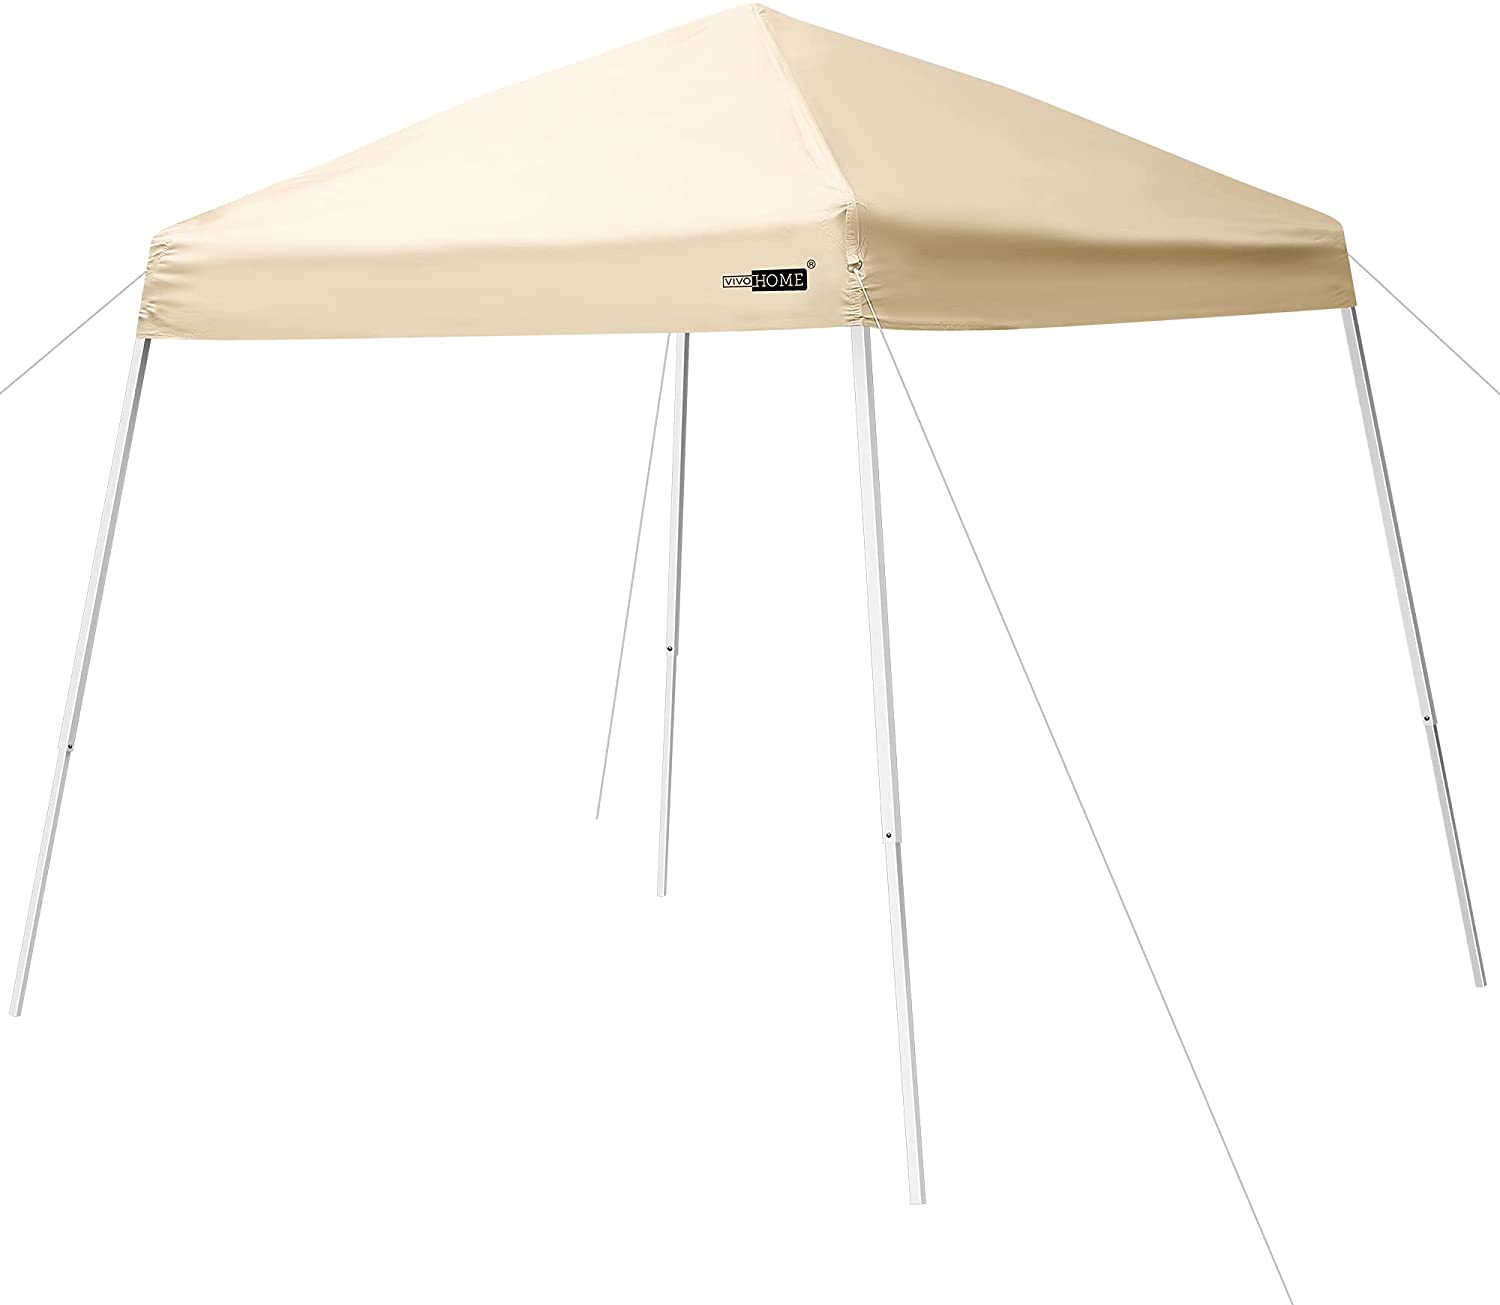 VIVOHOME Slant Leg Outdoor Easy Pop Up Canopy Party Tent Beige 8 x 8 Feet - image 1 of 8